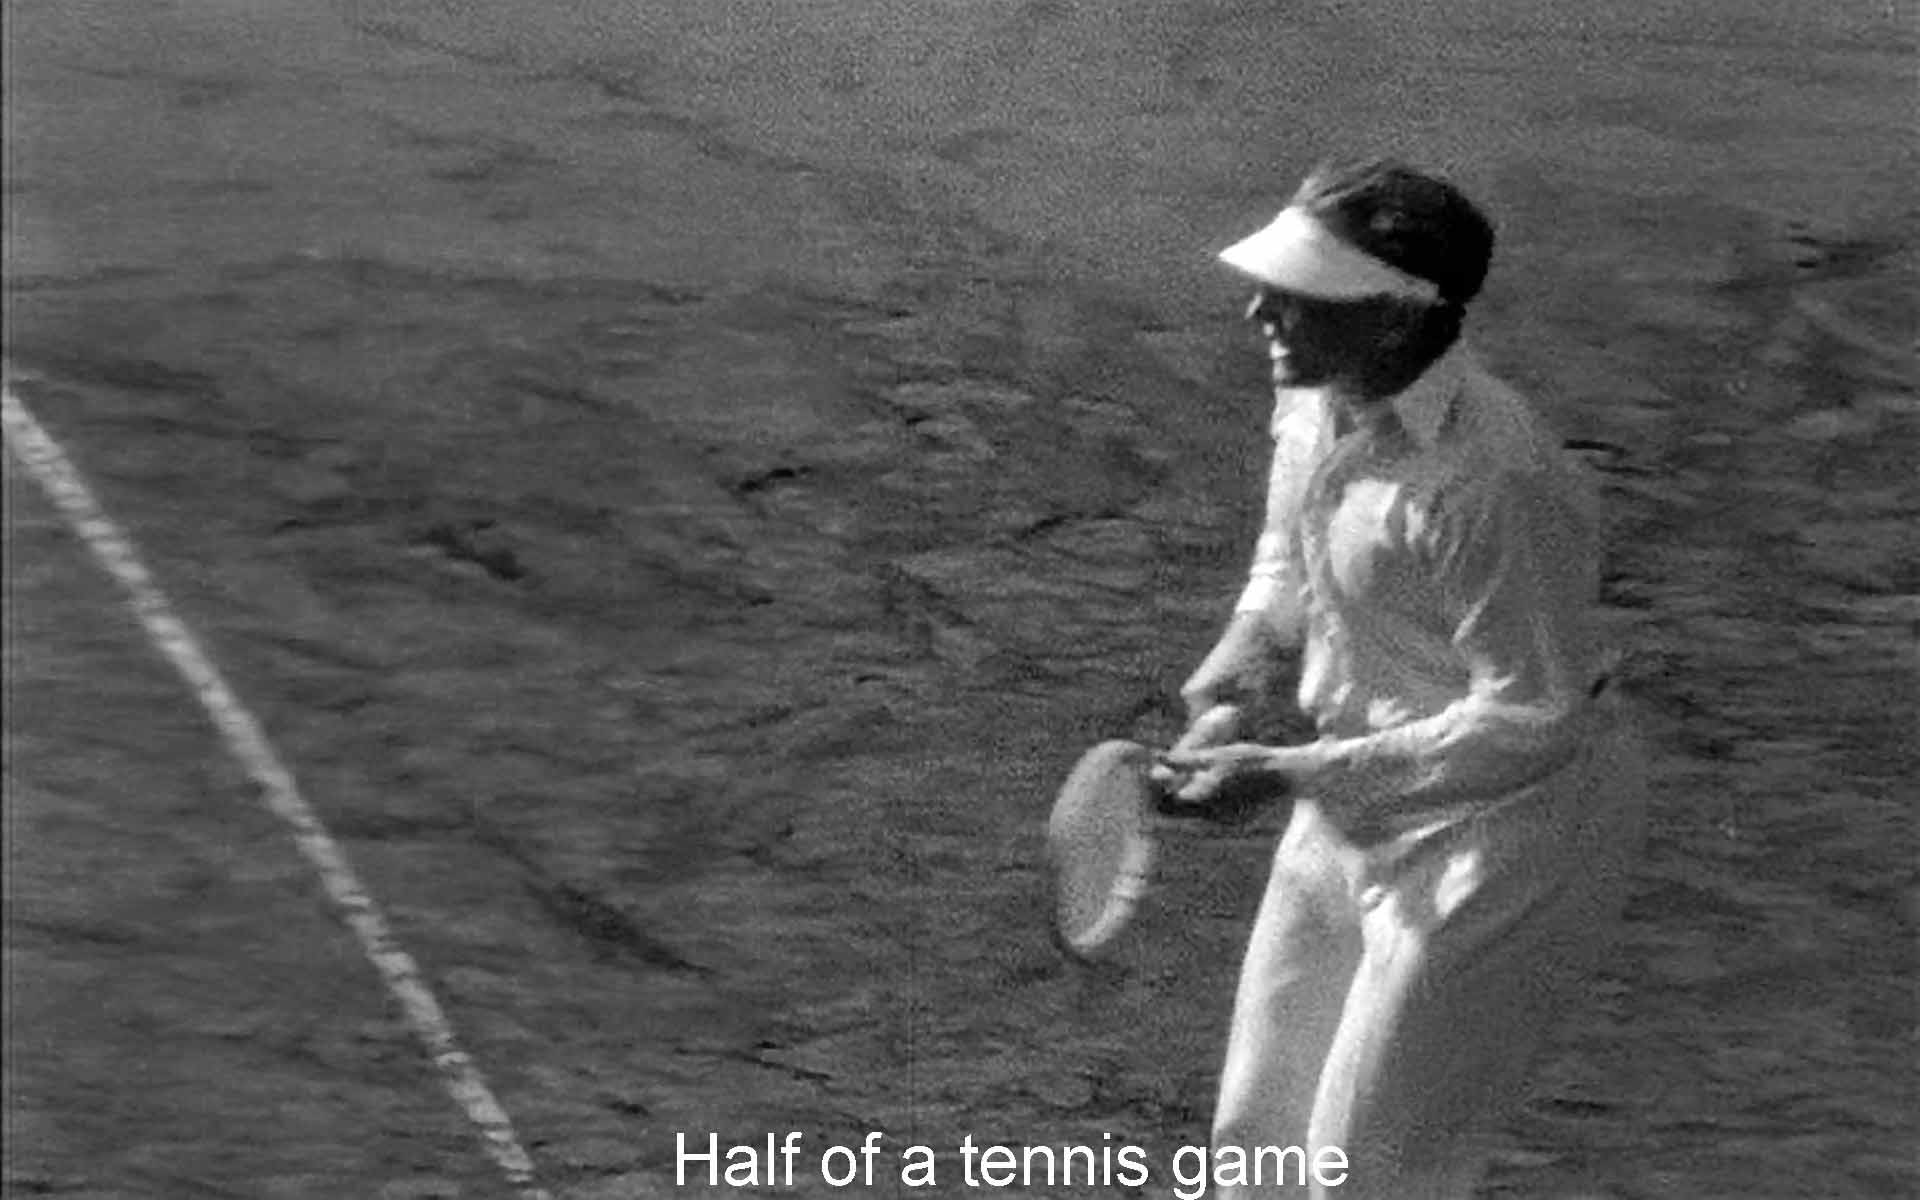 Half of a tennis game